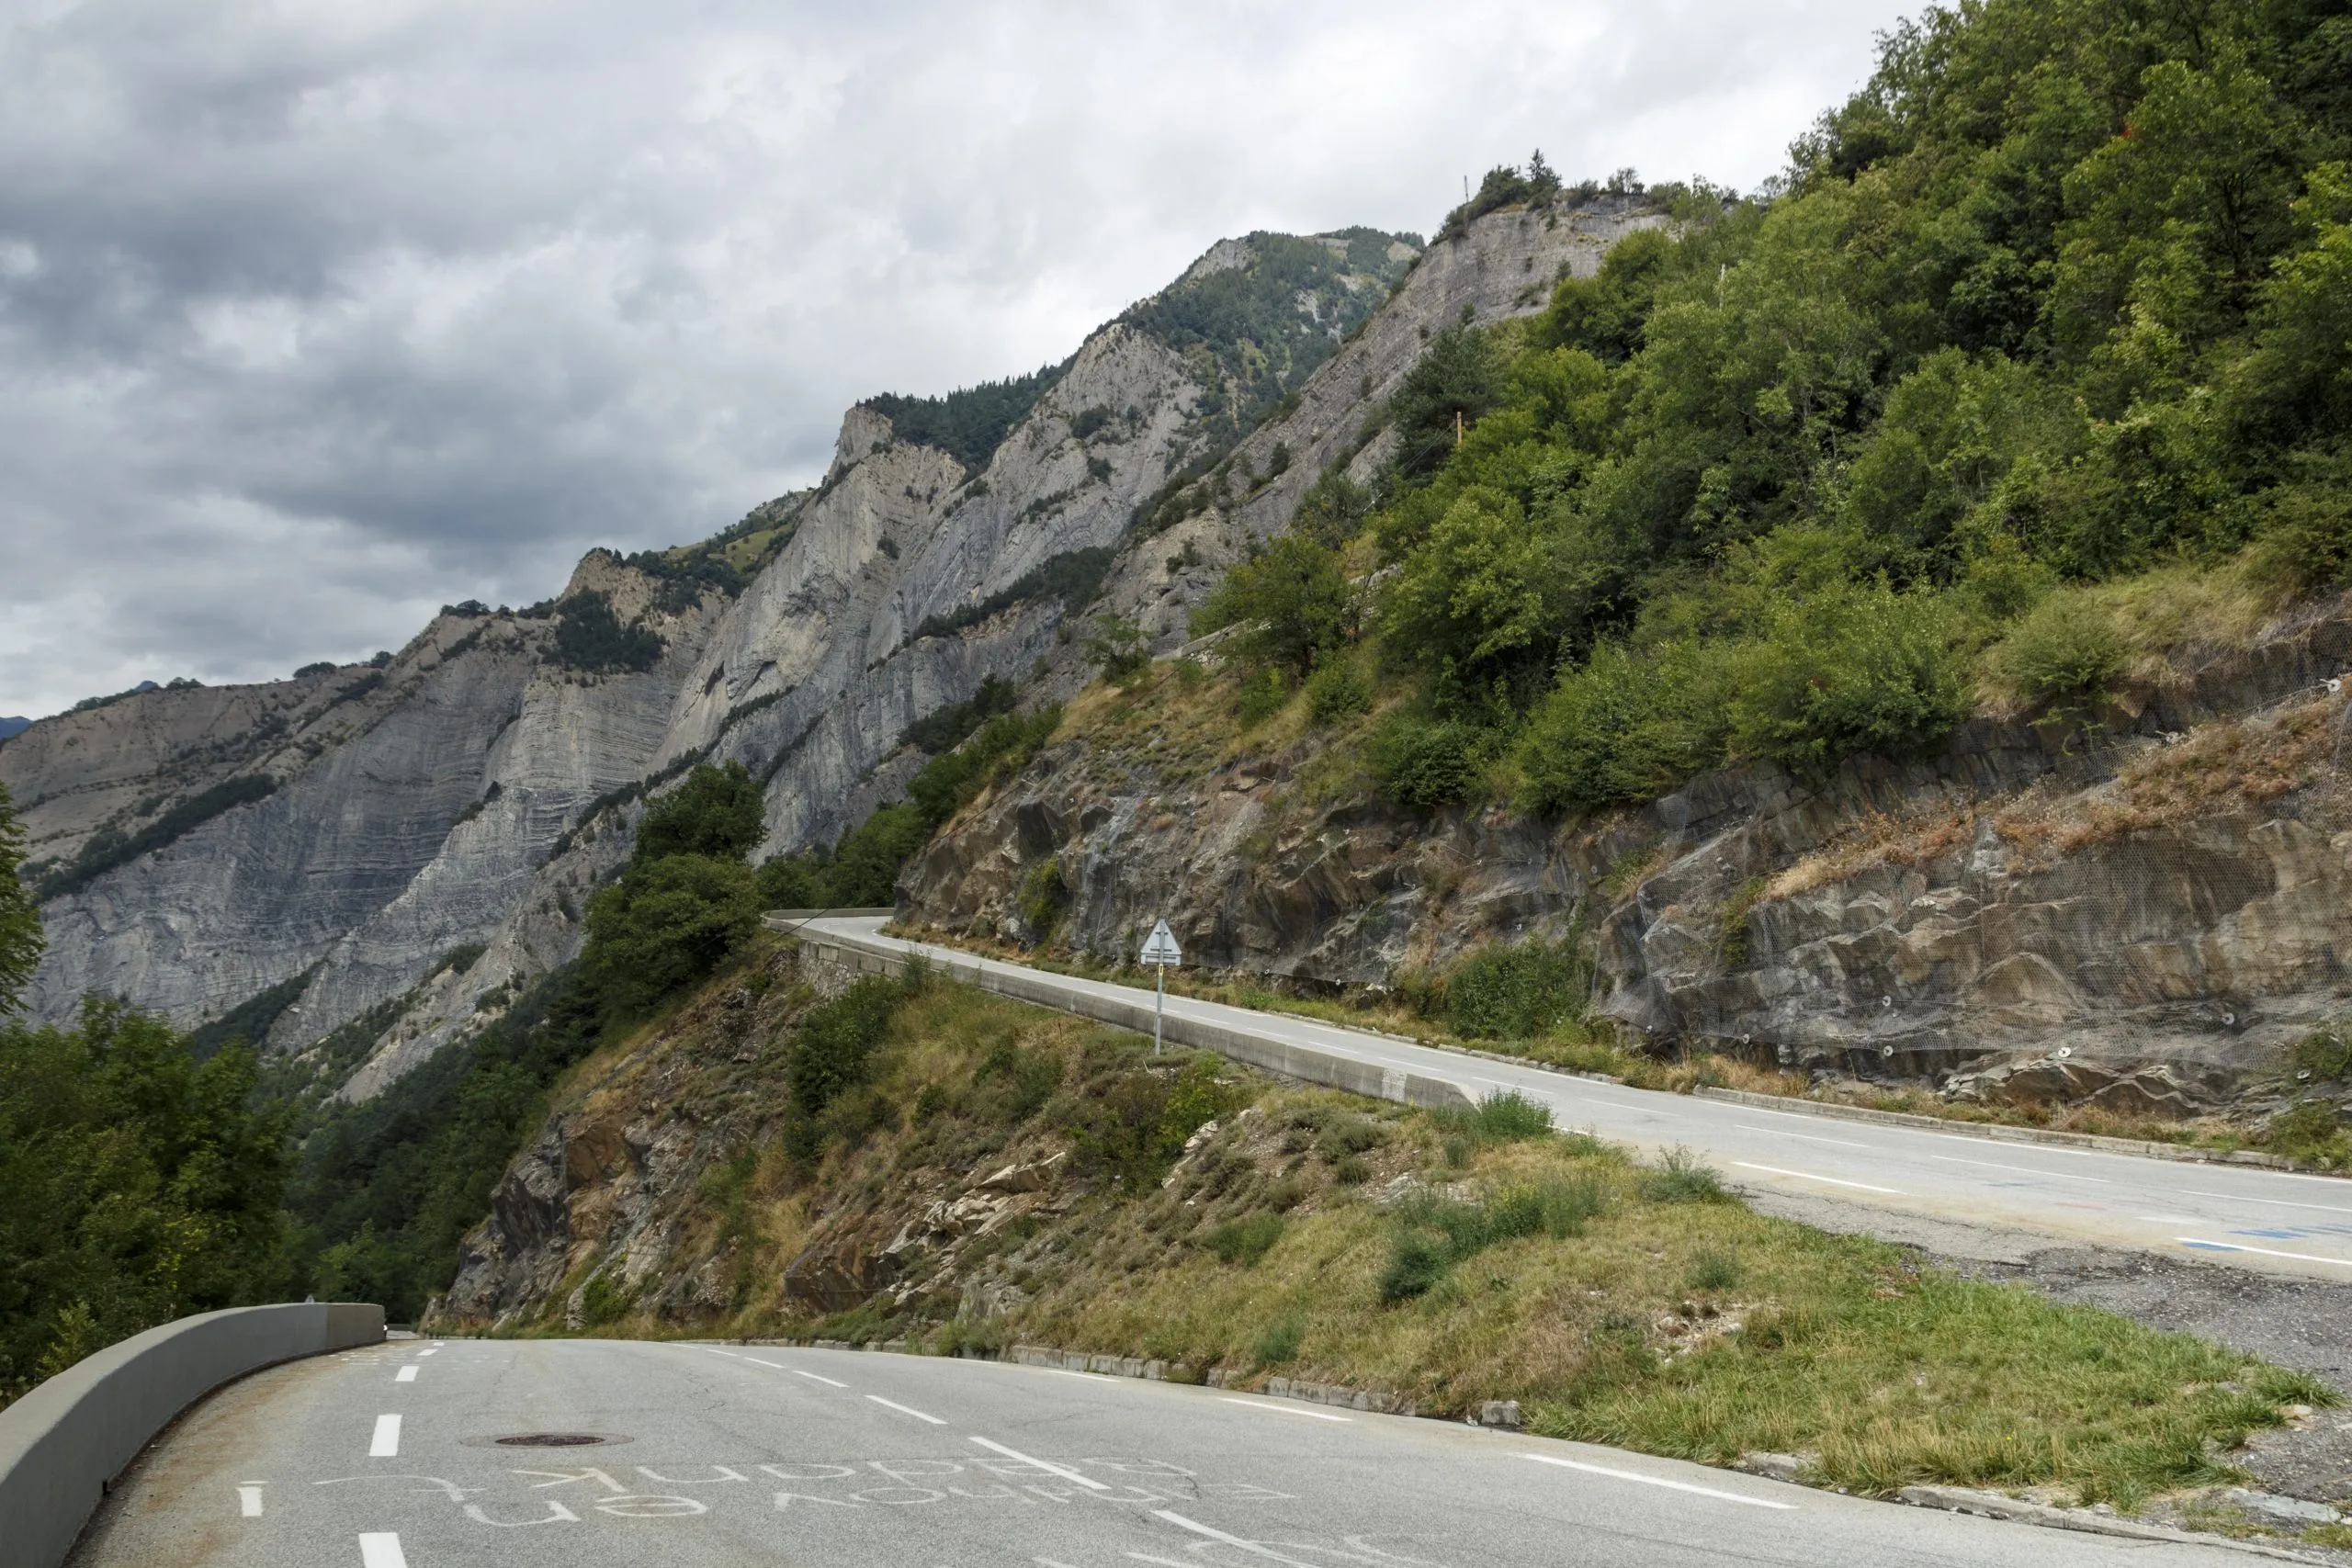 L'Alpe d'Huez, France - August 19, 2019: Ascent of the famous climb to L'Alpe d'Huez and itinerary of the Tour de France at bend 20